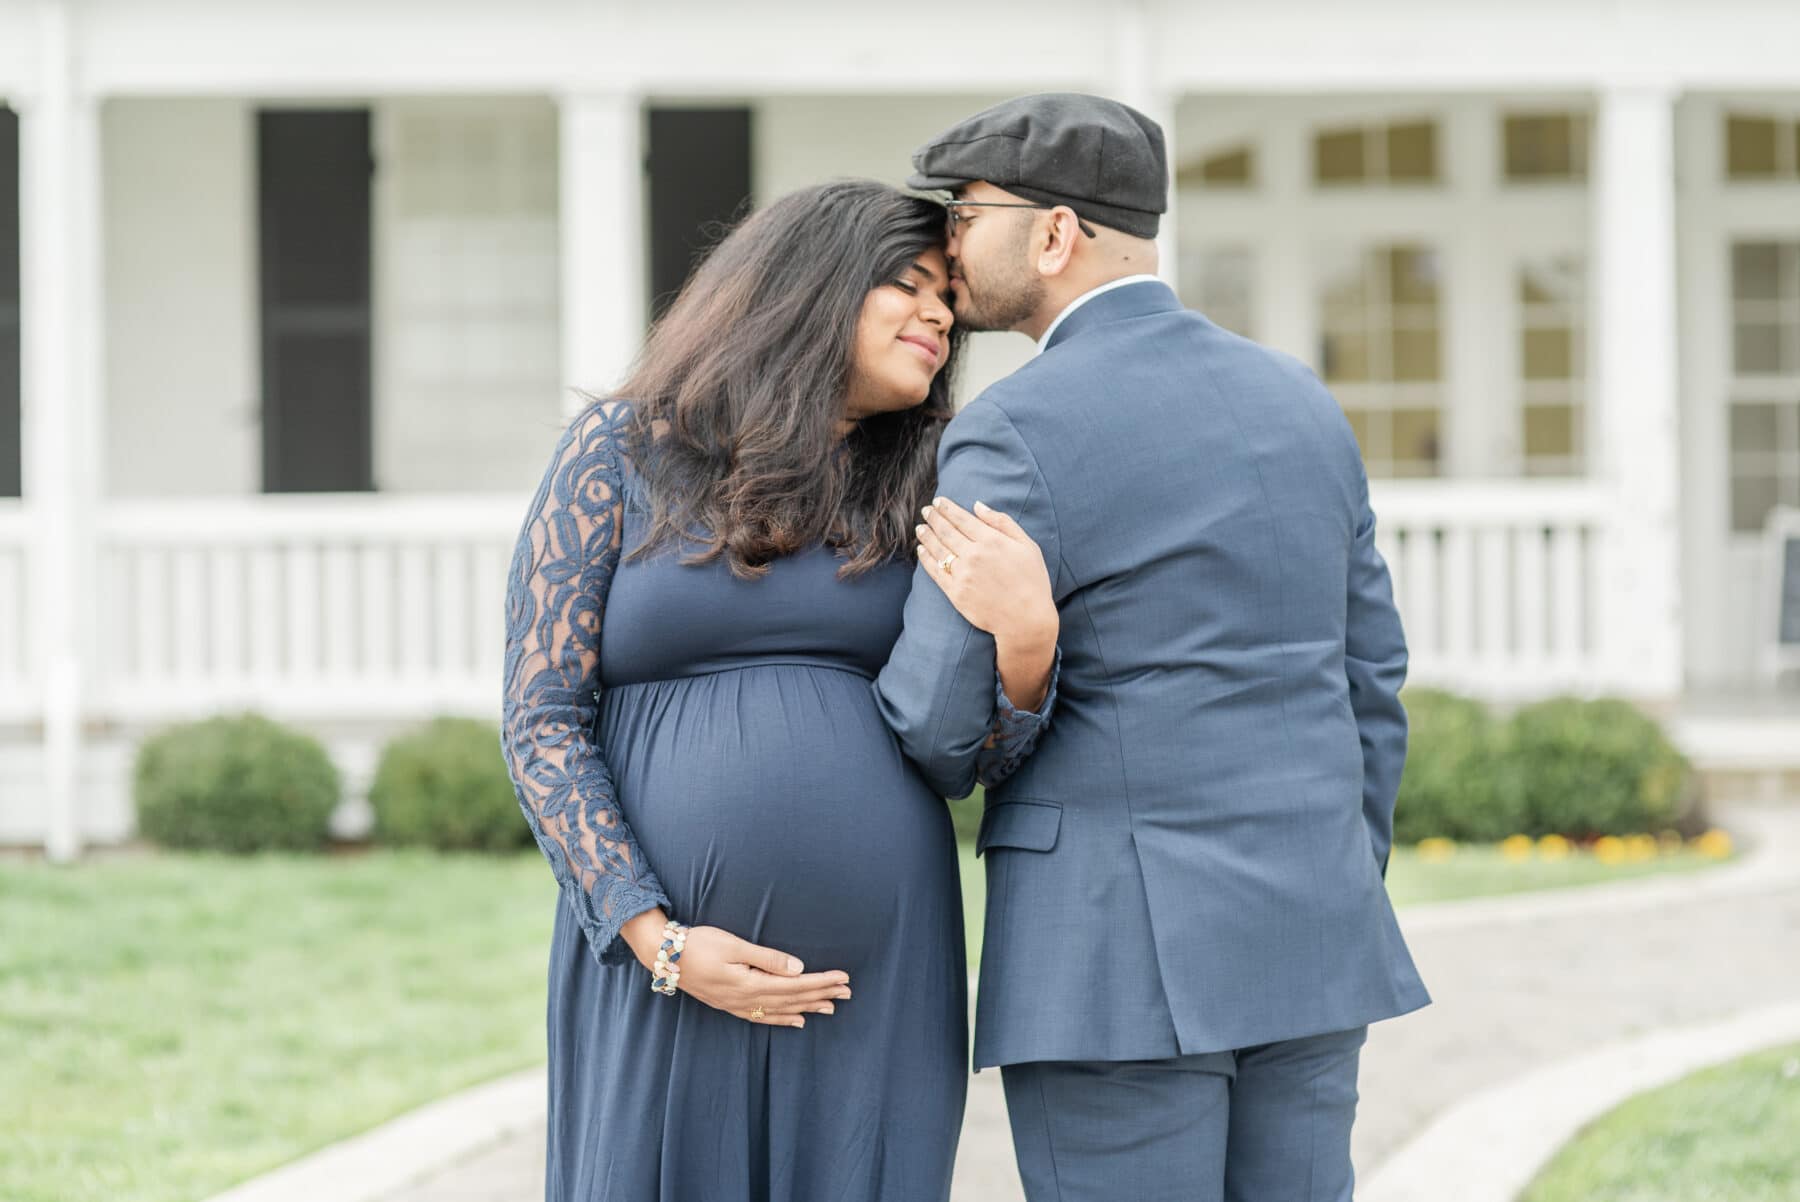 Ravenswood Mansion Maternity Session by Dolly Delong featured on Nashville Baby Guide